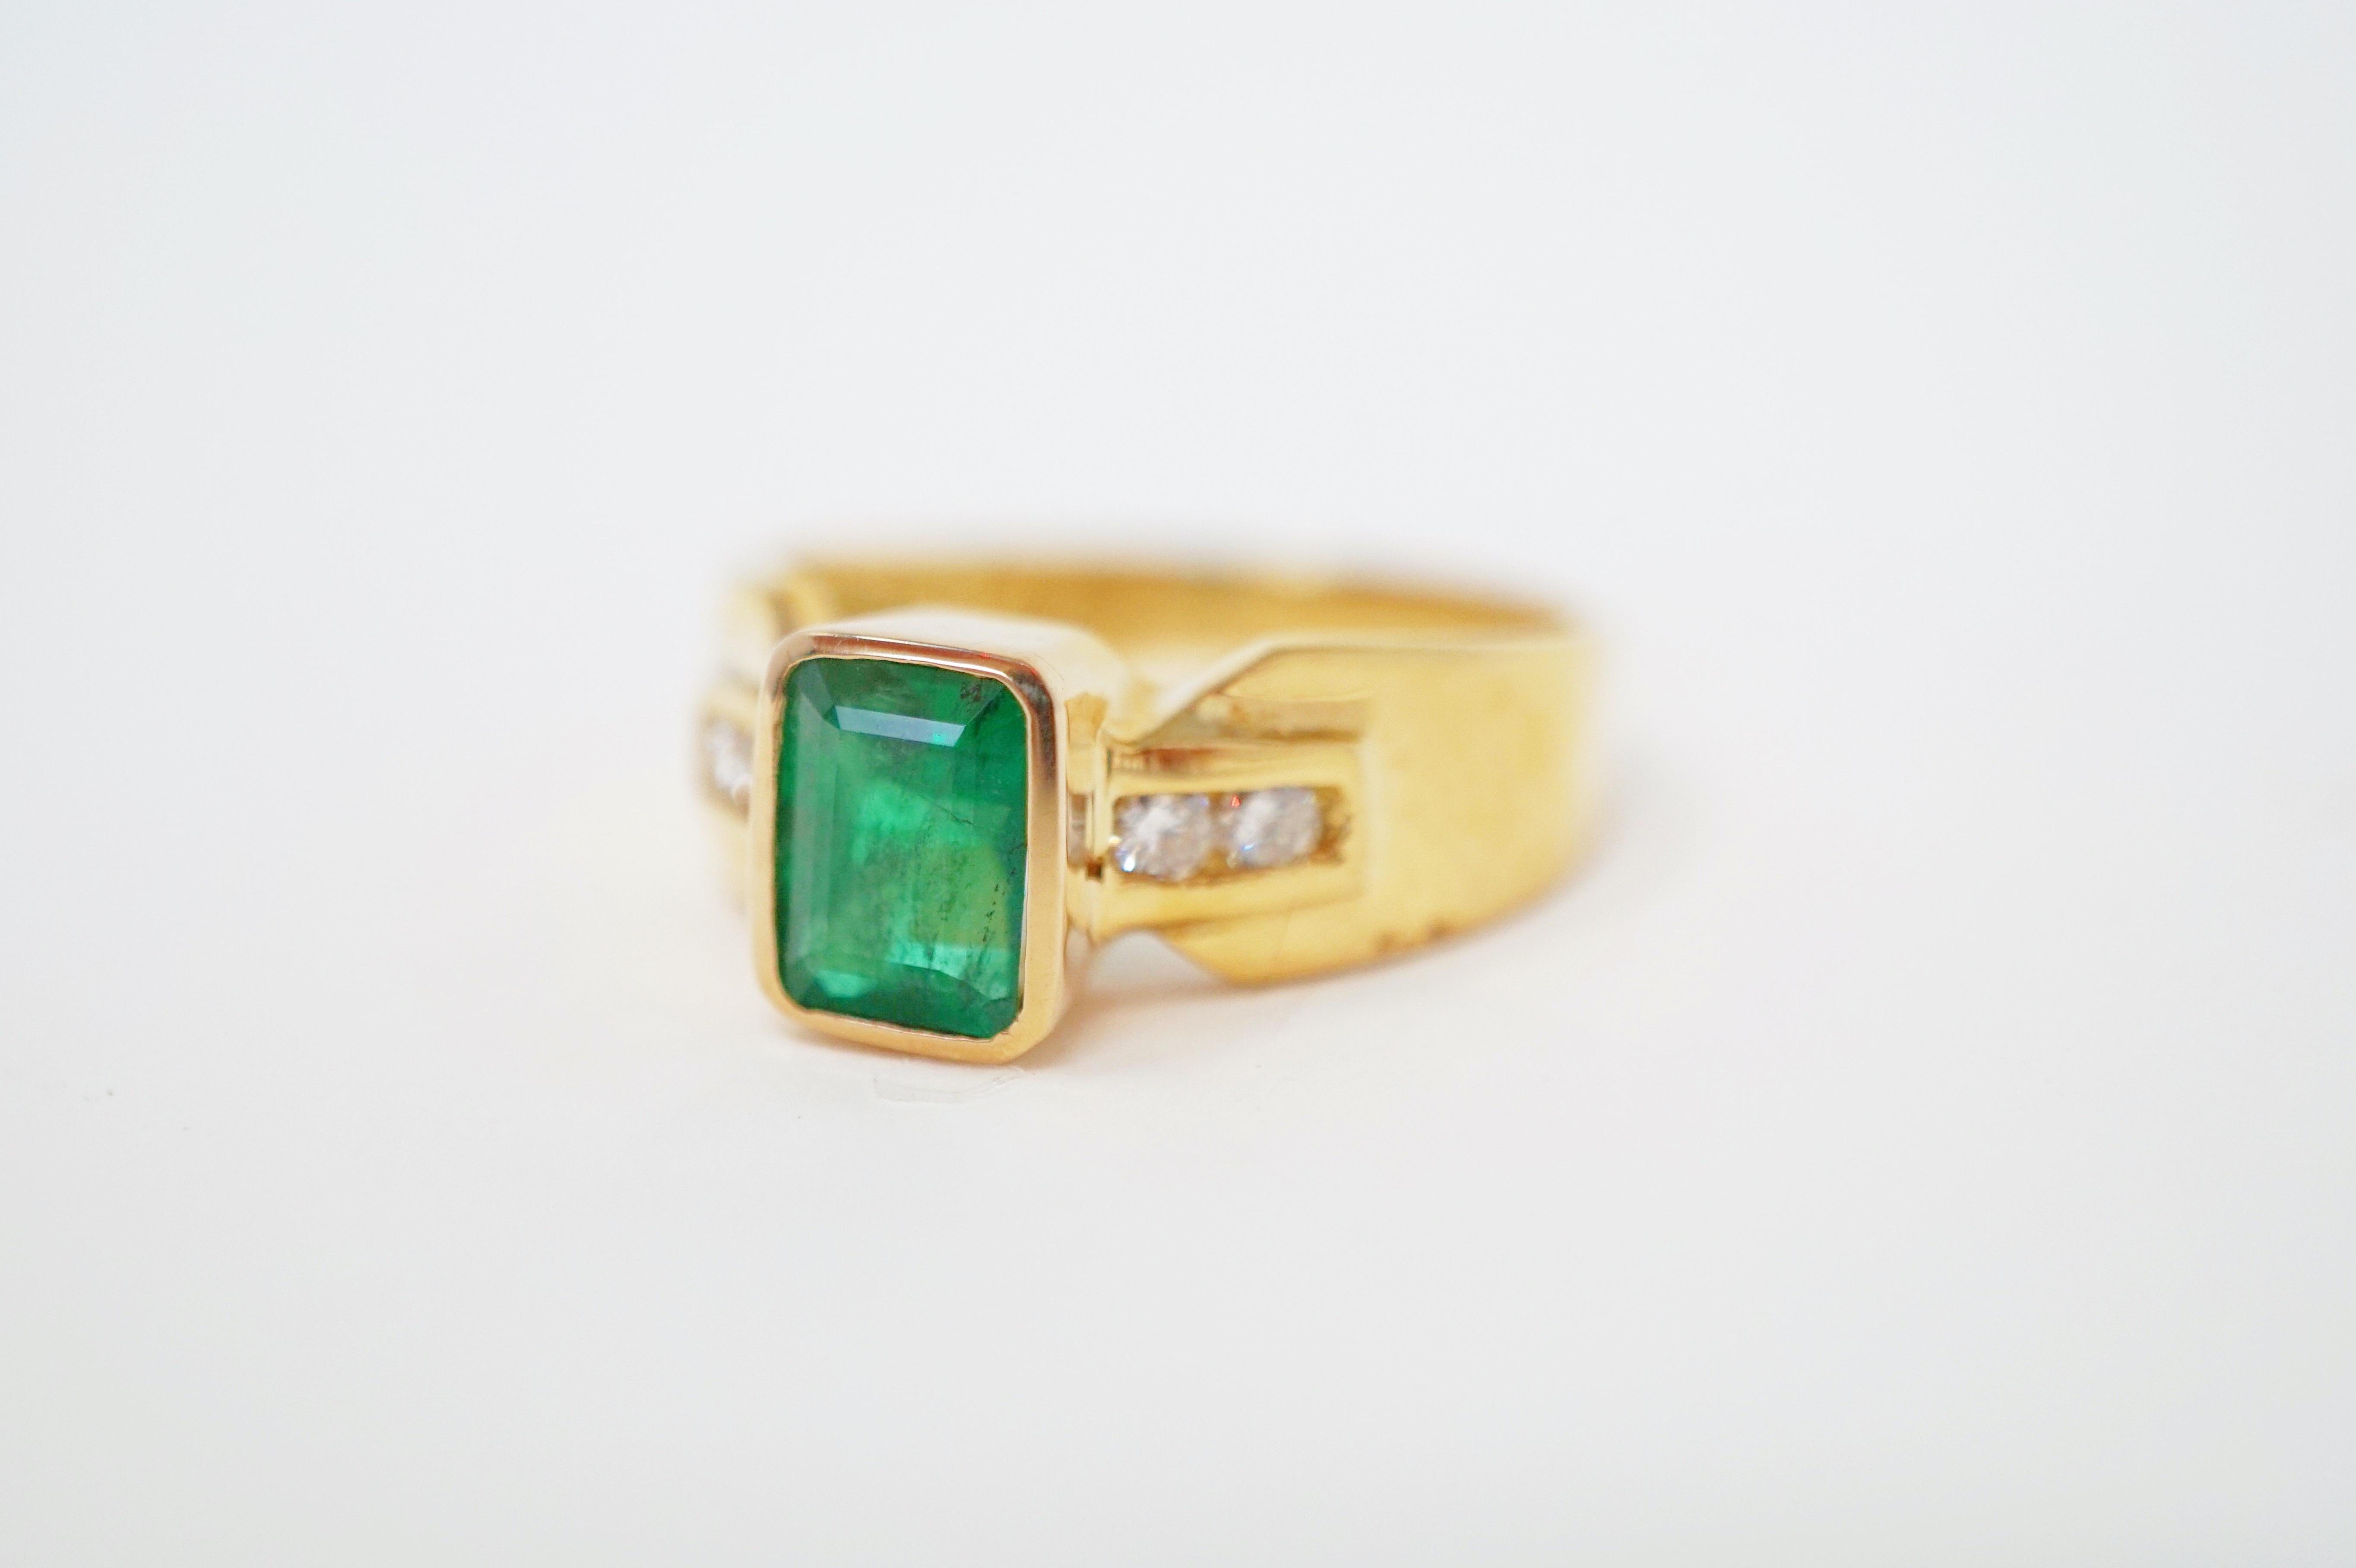 Brilliant & Vivid Emerald Ring in 14k Yellow Gold with Diamond Accents.

Features one emerald-cut emerald weighing approximately 1.00 ct., flanked by four full-cut diamonds weighing a total of approximately 0.20 cttw., set in a 14k yellow gold